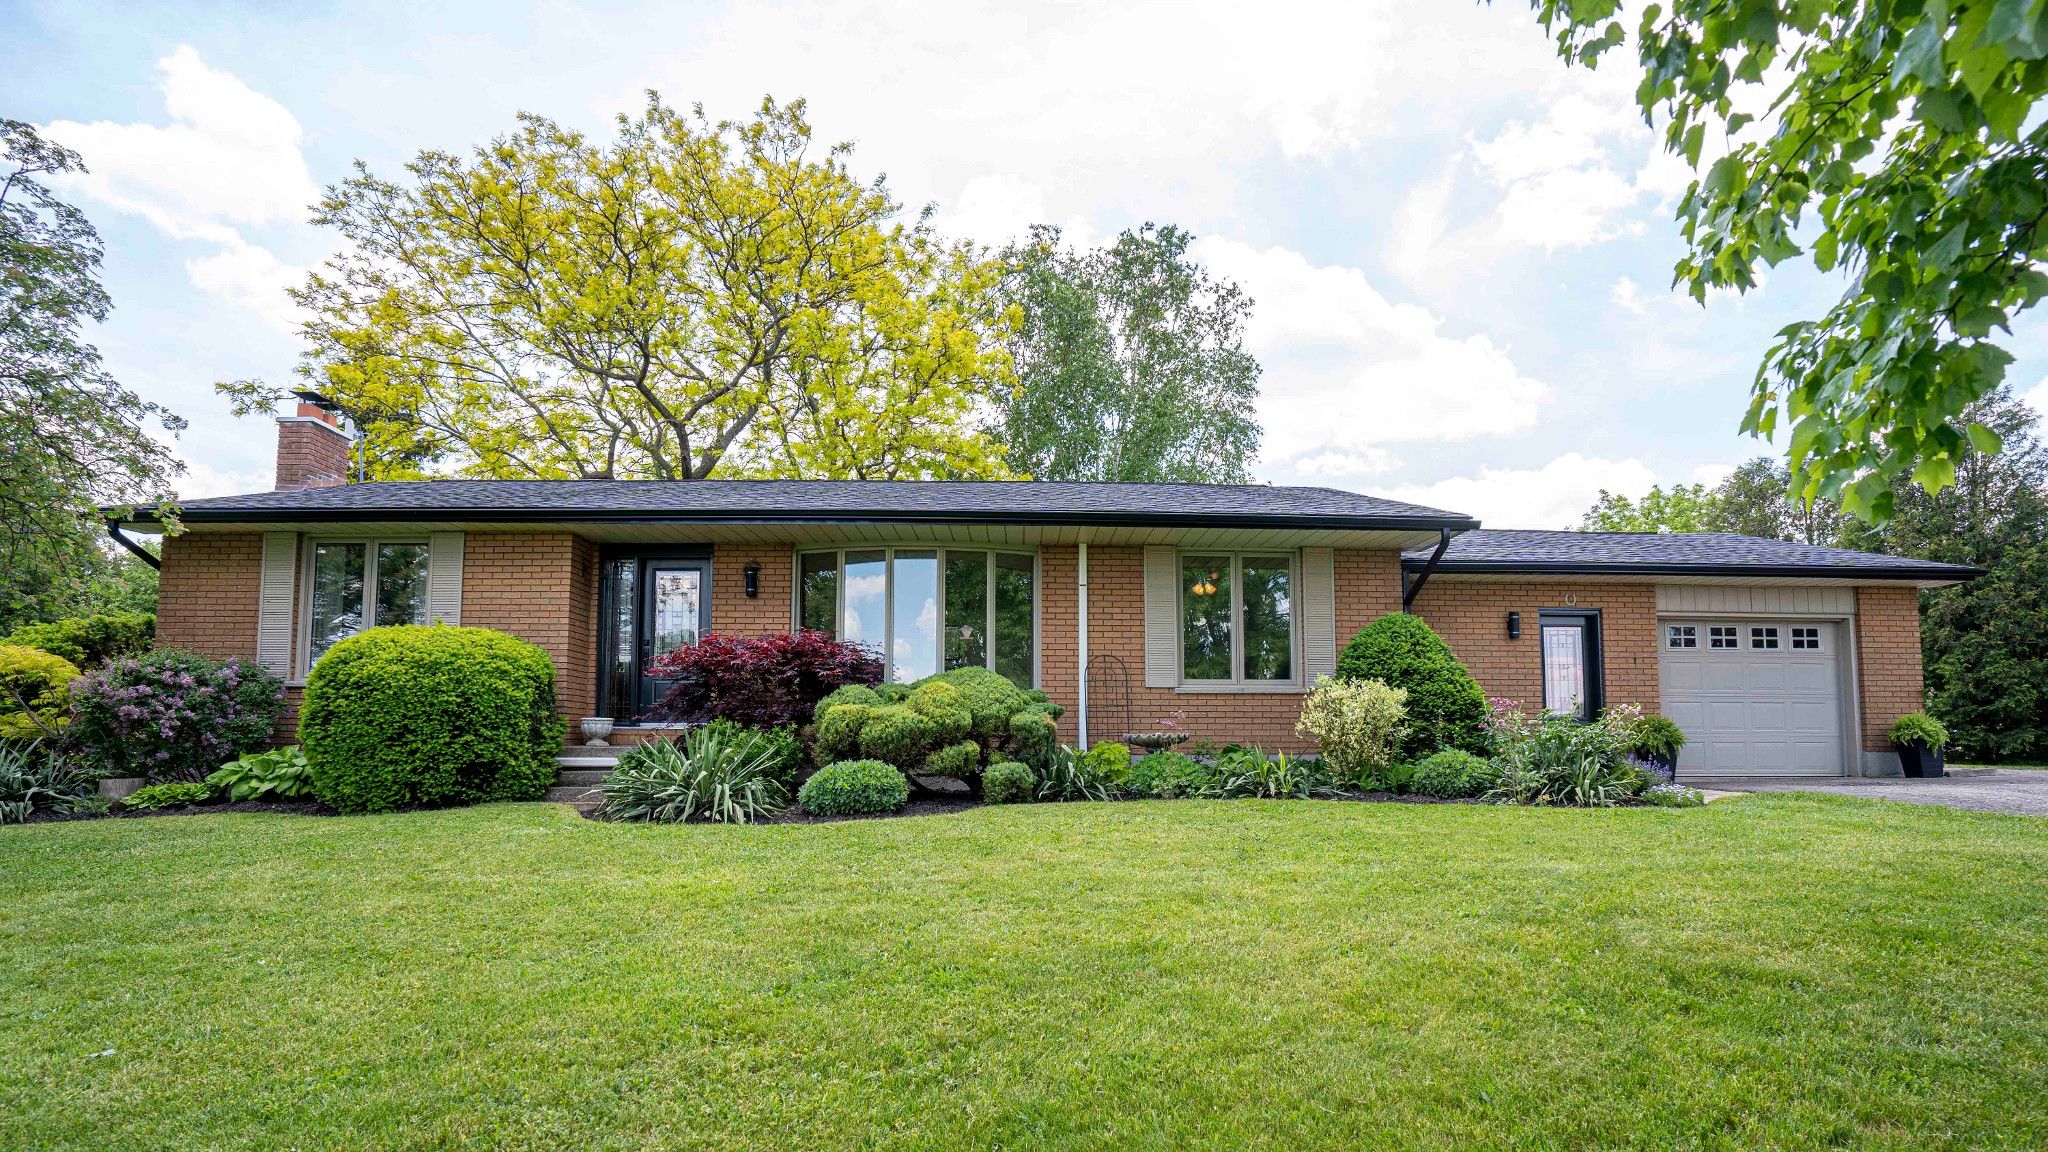 I have sold a property at 5011 Avon DR in Springfield
